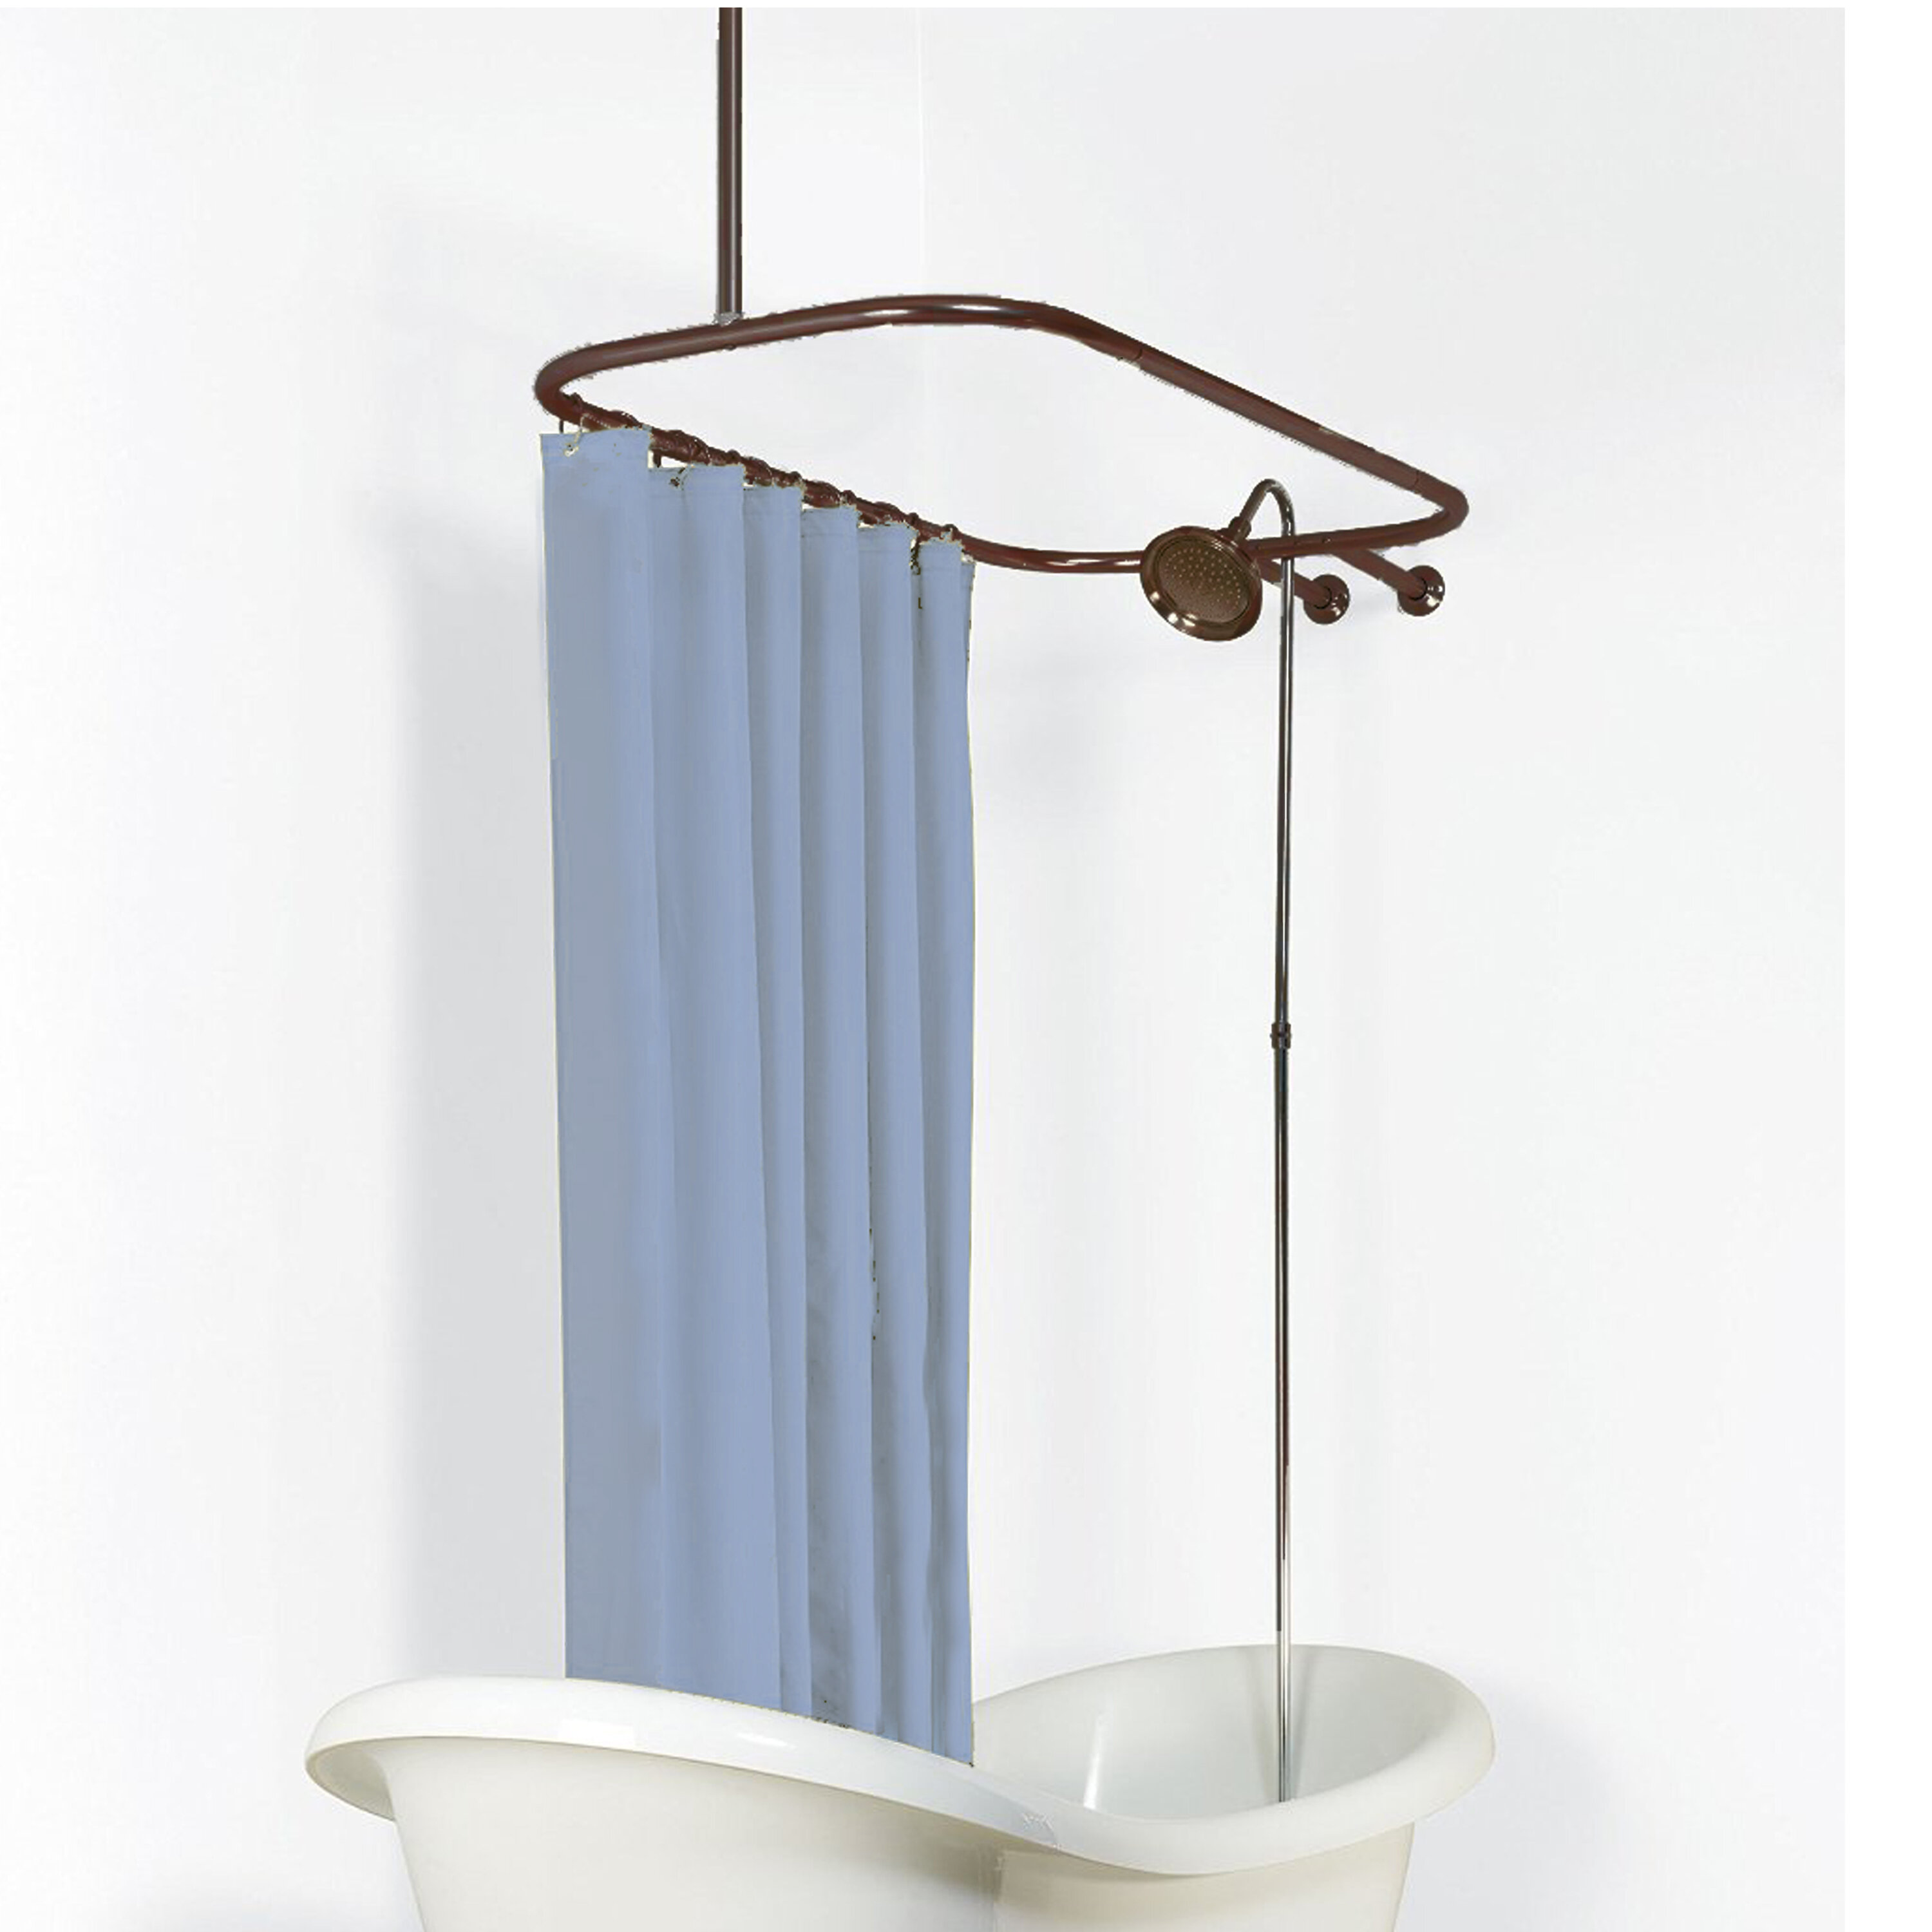 Swcorp AC-AZSR88ORB 48-88 in. Anzzi Shower Curtain Rod with Shower Hooks in Oil Rubbed Bronze